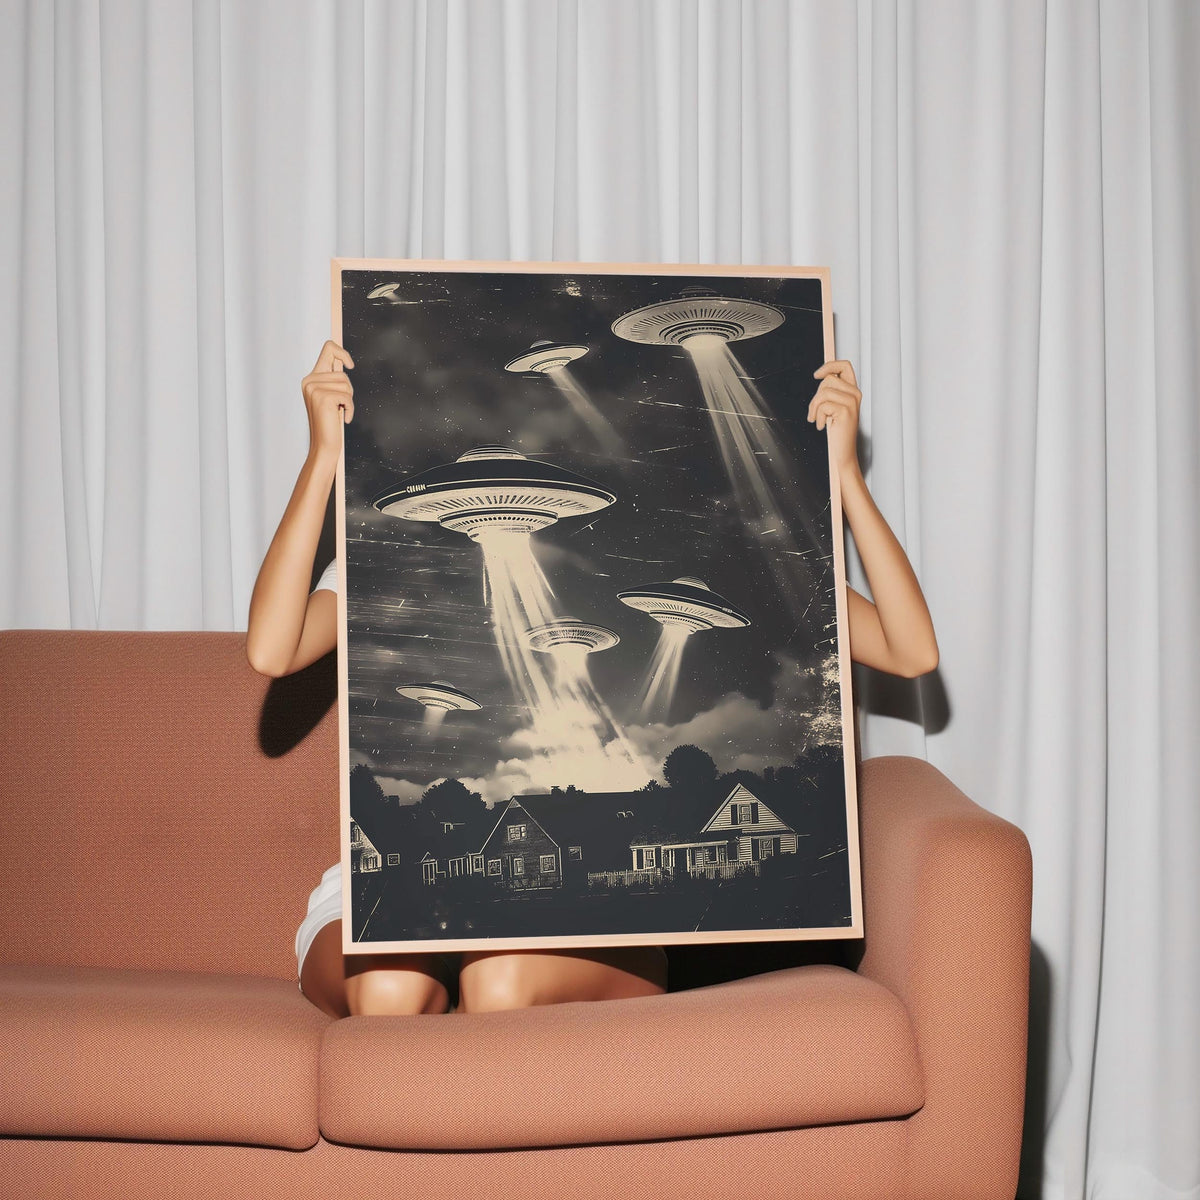 a woman sitting on a couch holding up a poster